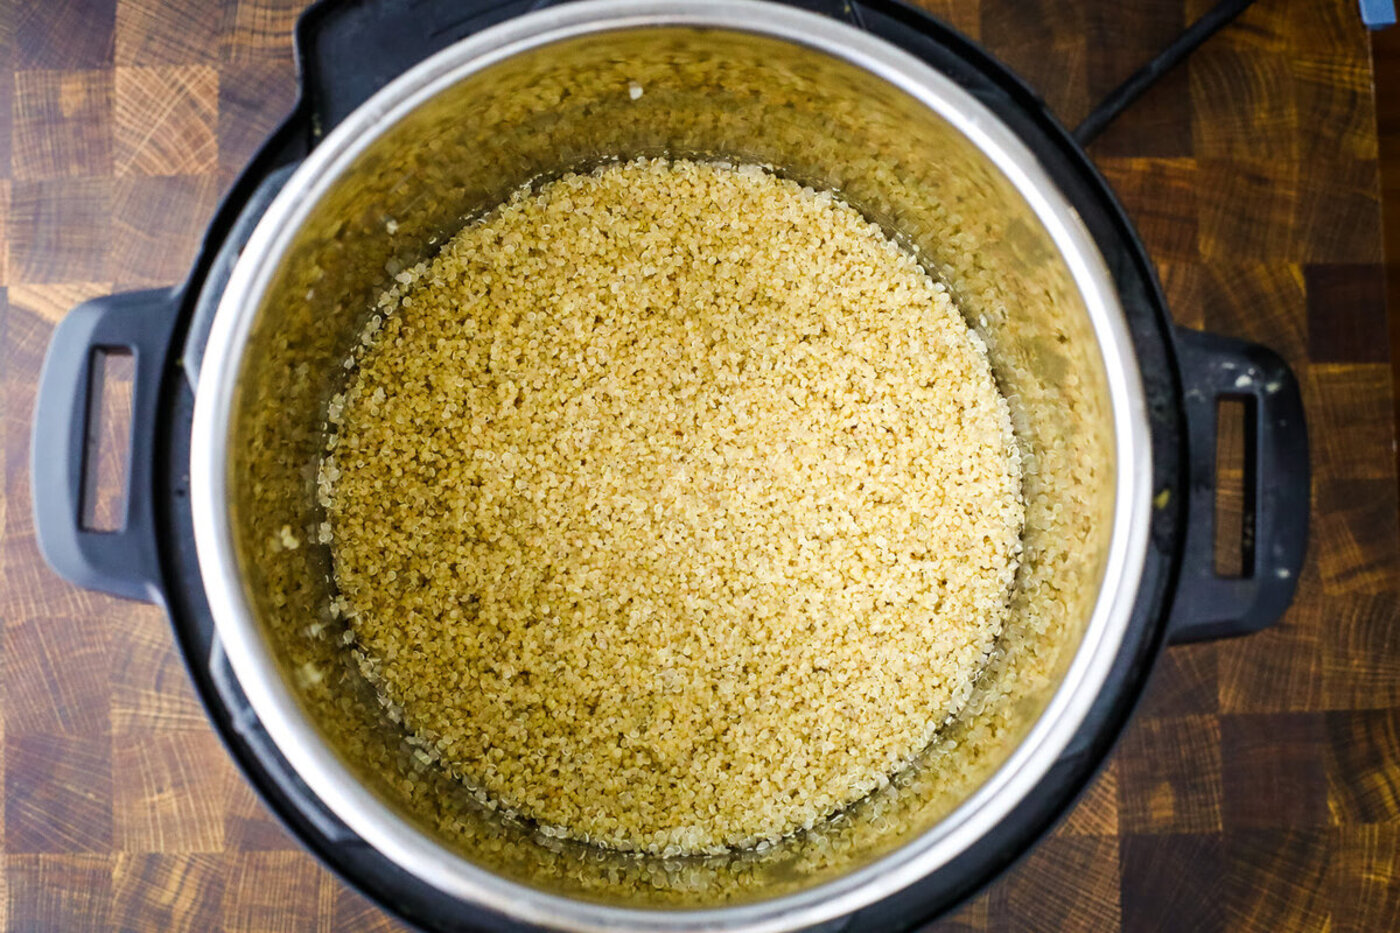 How To Make Quinoa In An Electric Pressure Cooker